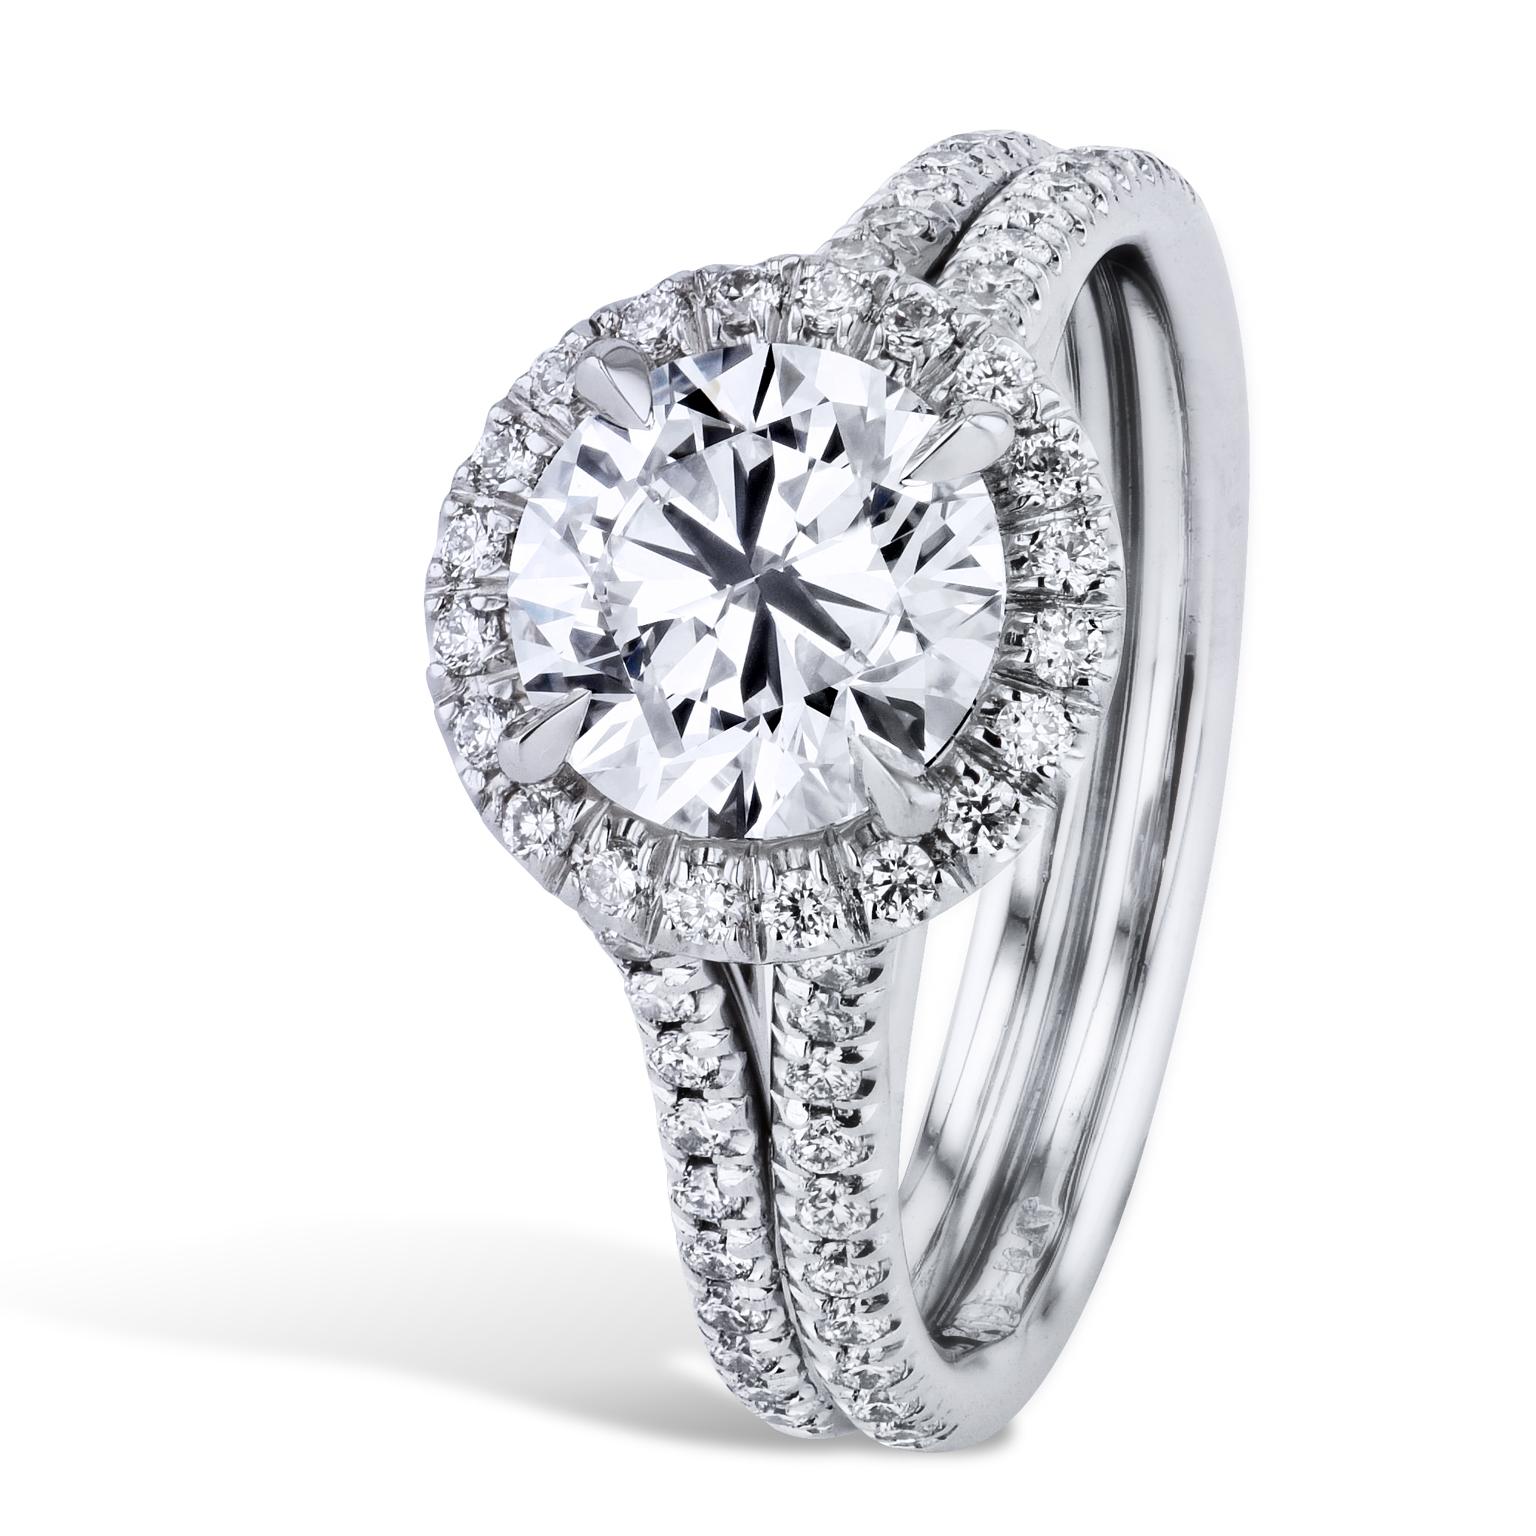 GIA Certified 1.56 Carat Diamond with Pave Set Halo Platinum Engagement Ring

Say I do to this handmade 1.56 carat H-SI1, (EX, EX, EX) round brilliant cut diamond centered in a halo of pave set diamonds (0.14 carats in total weight, G/H-VS), and